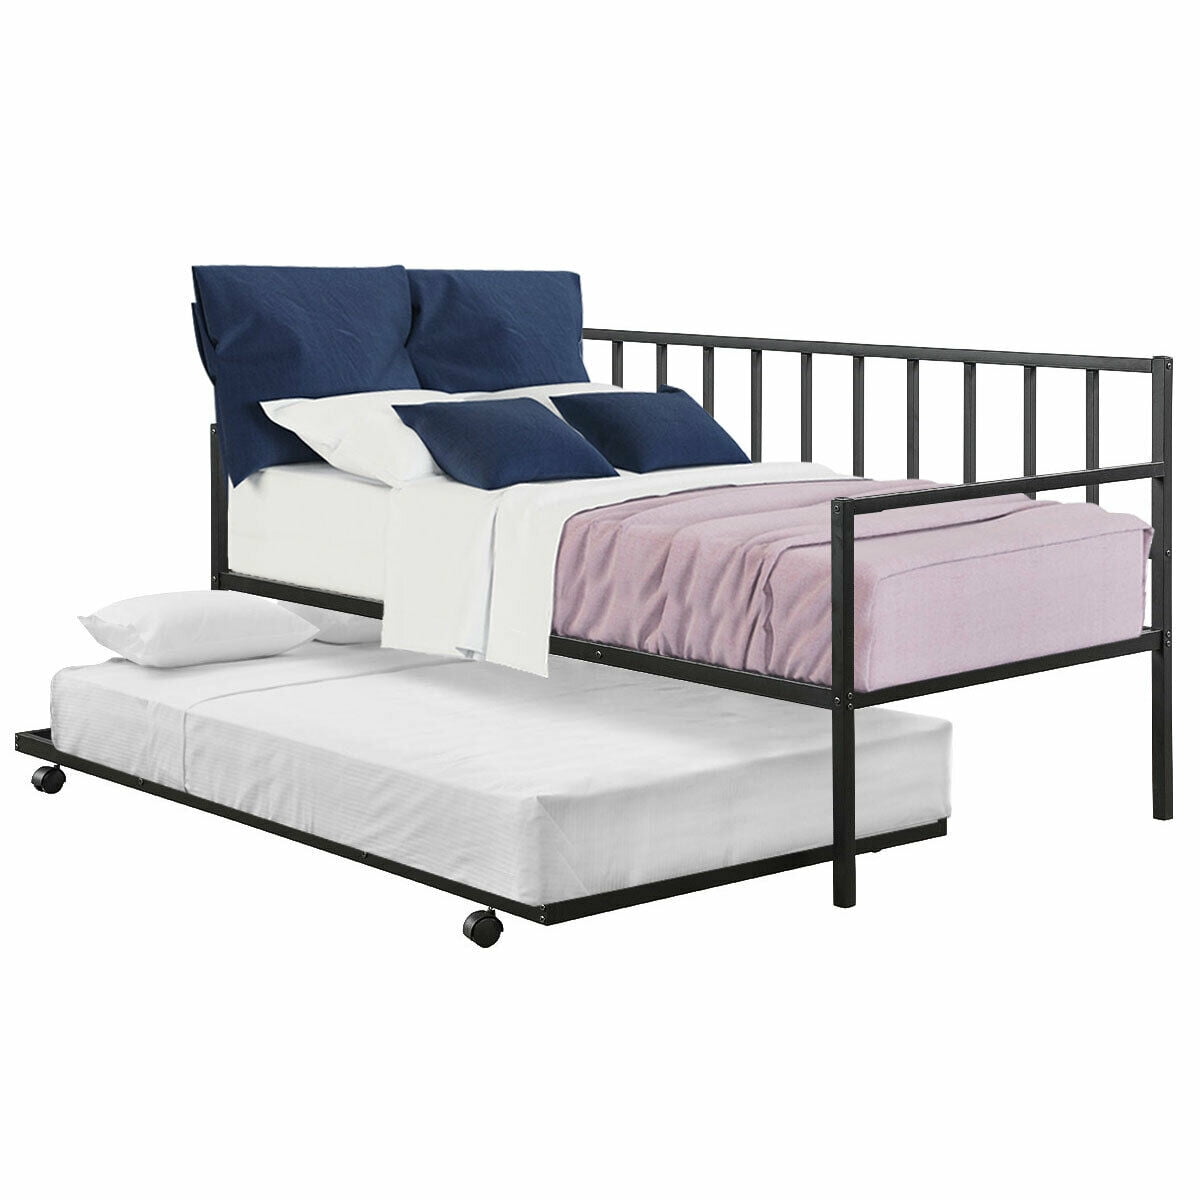 Gymax Twin Trundle Daybed W 4 Casters, Will A Twin Trundle Fit Under Queen Bed